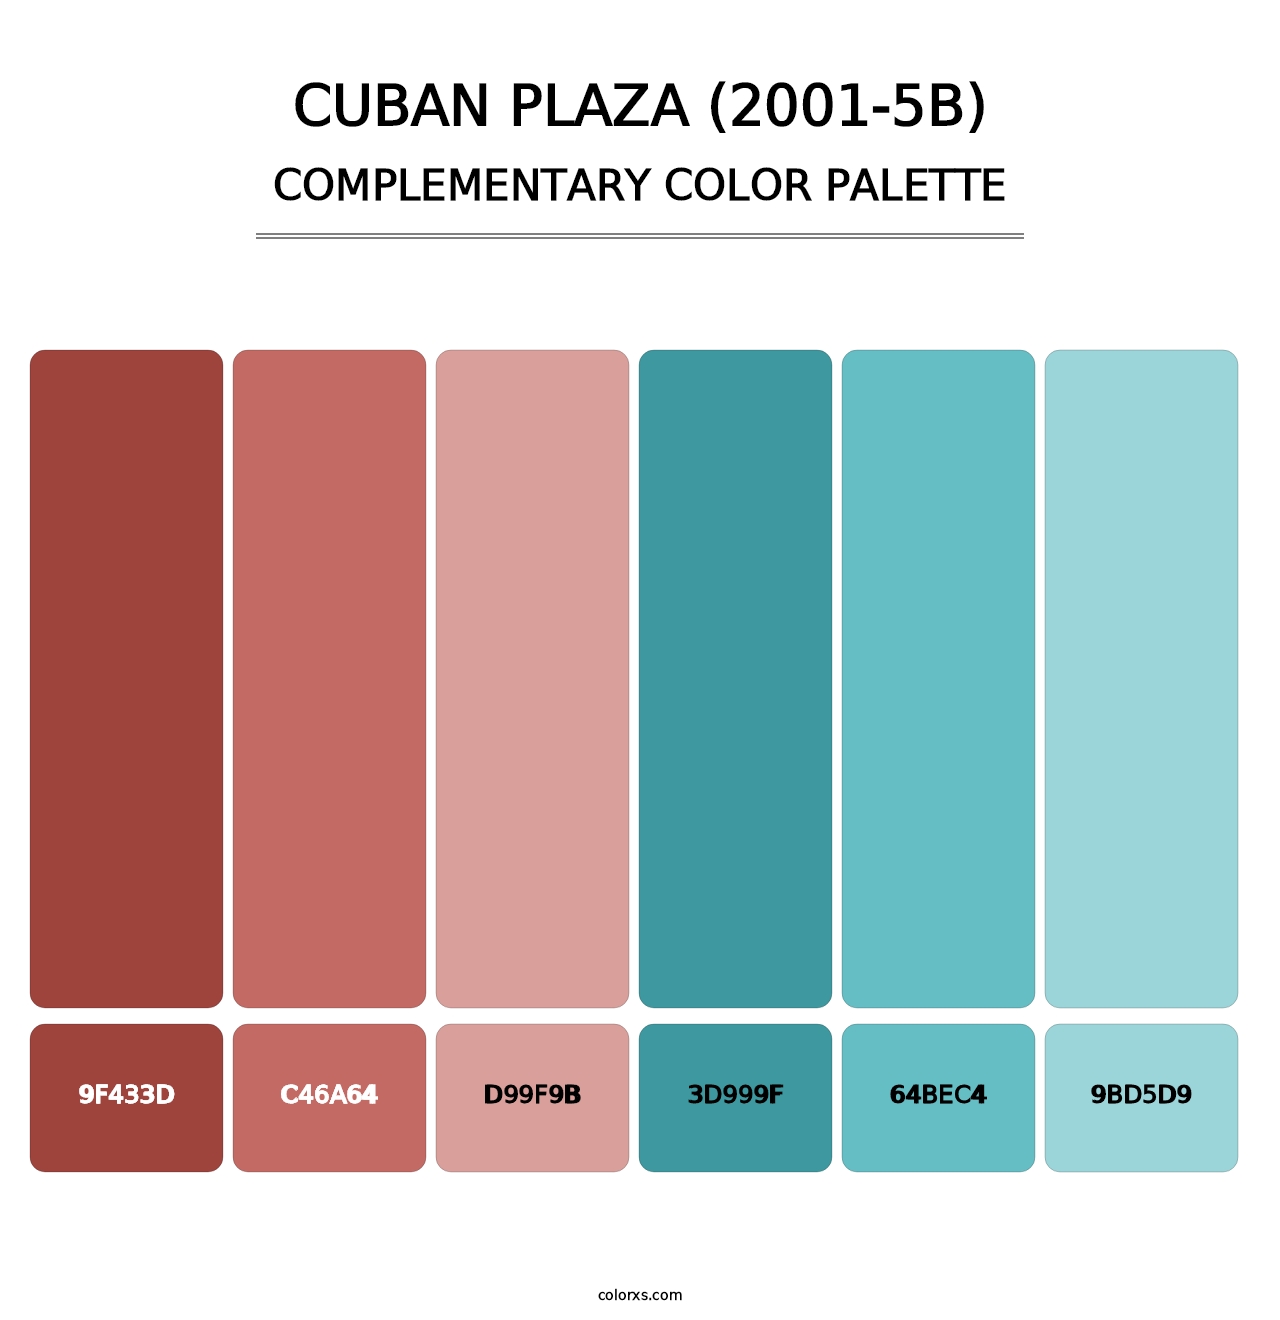 Cuban Plaza (2001-5B) - Complementary Color Palette